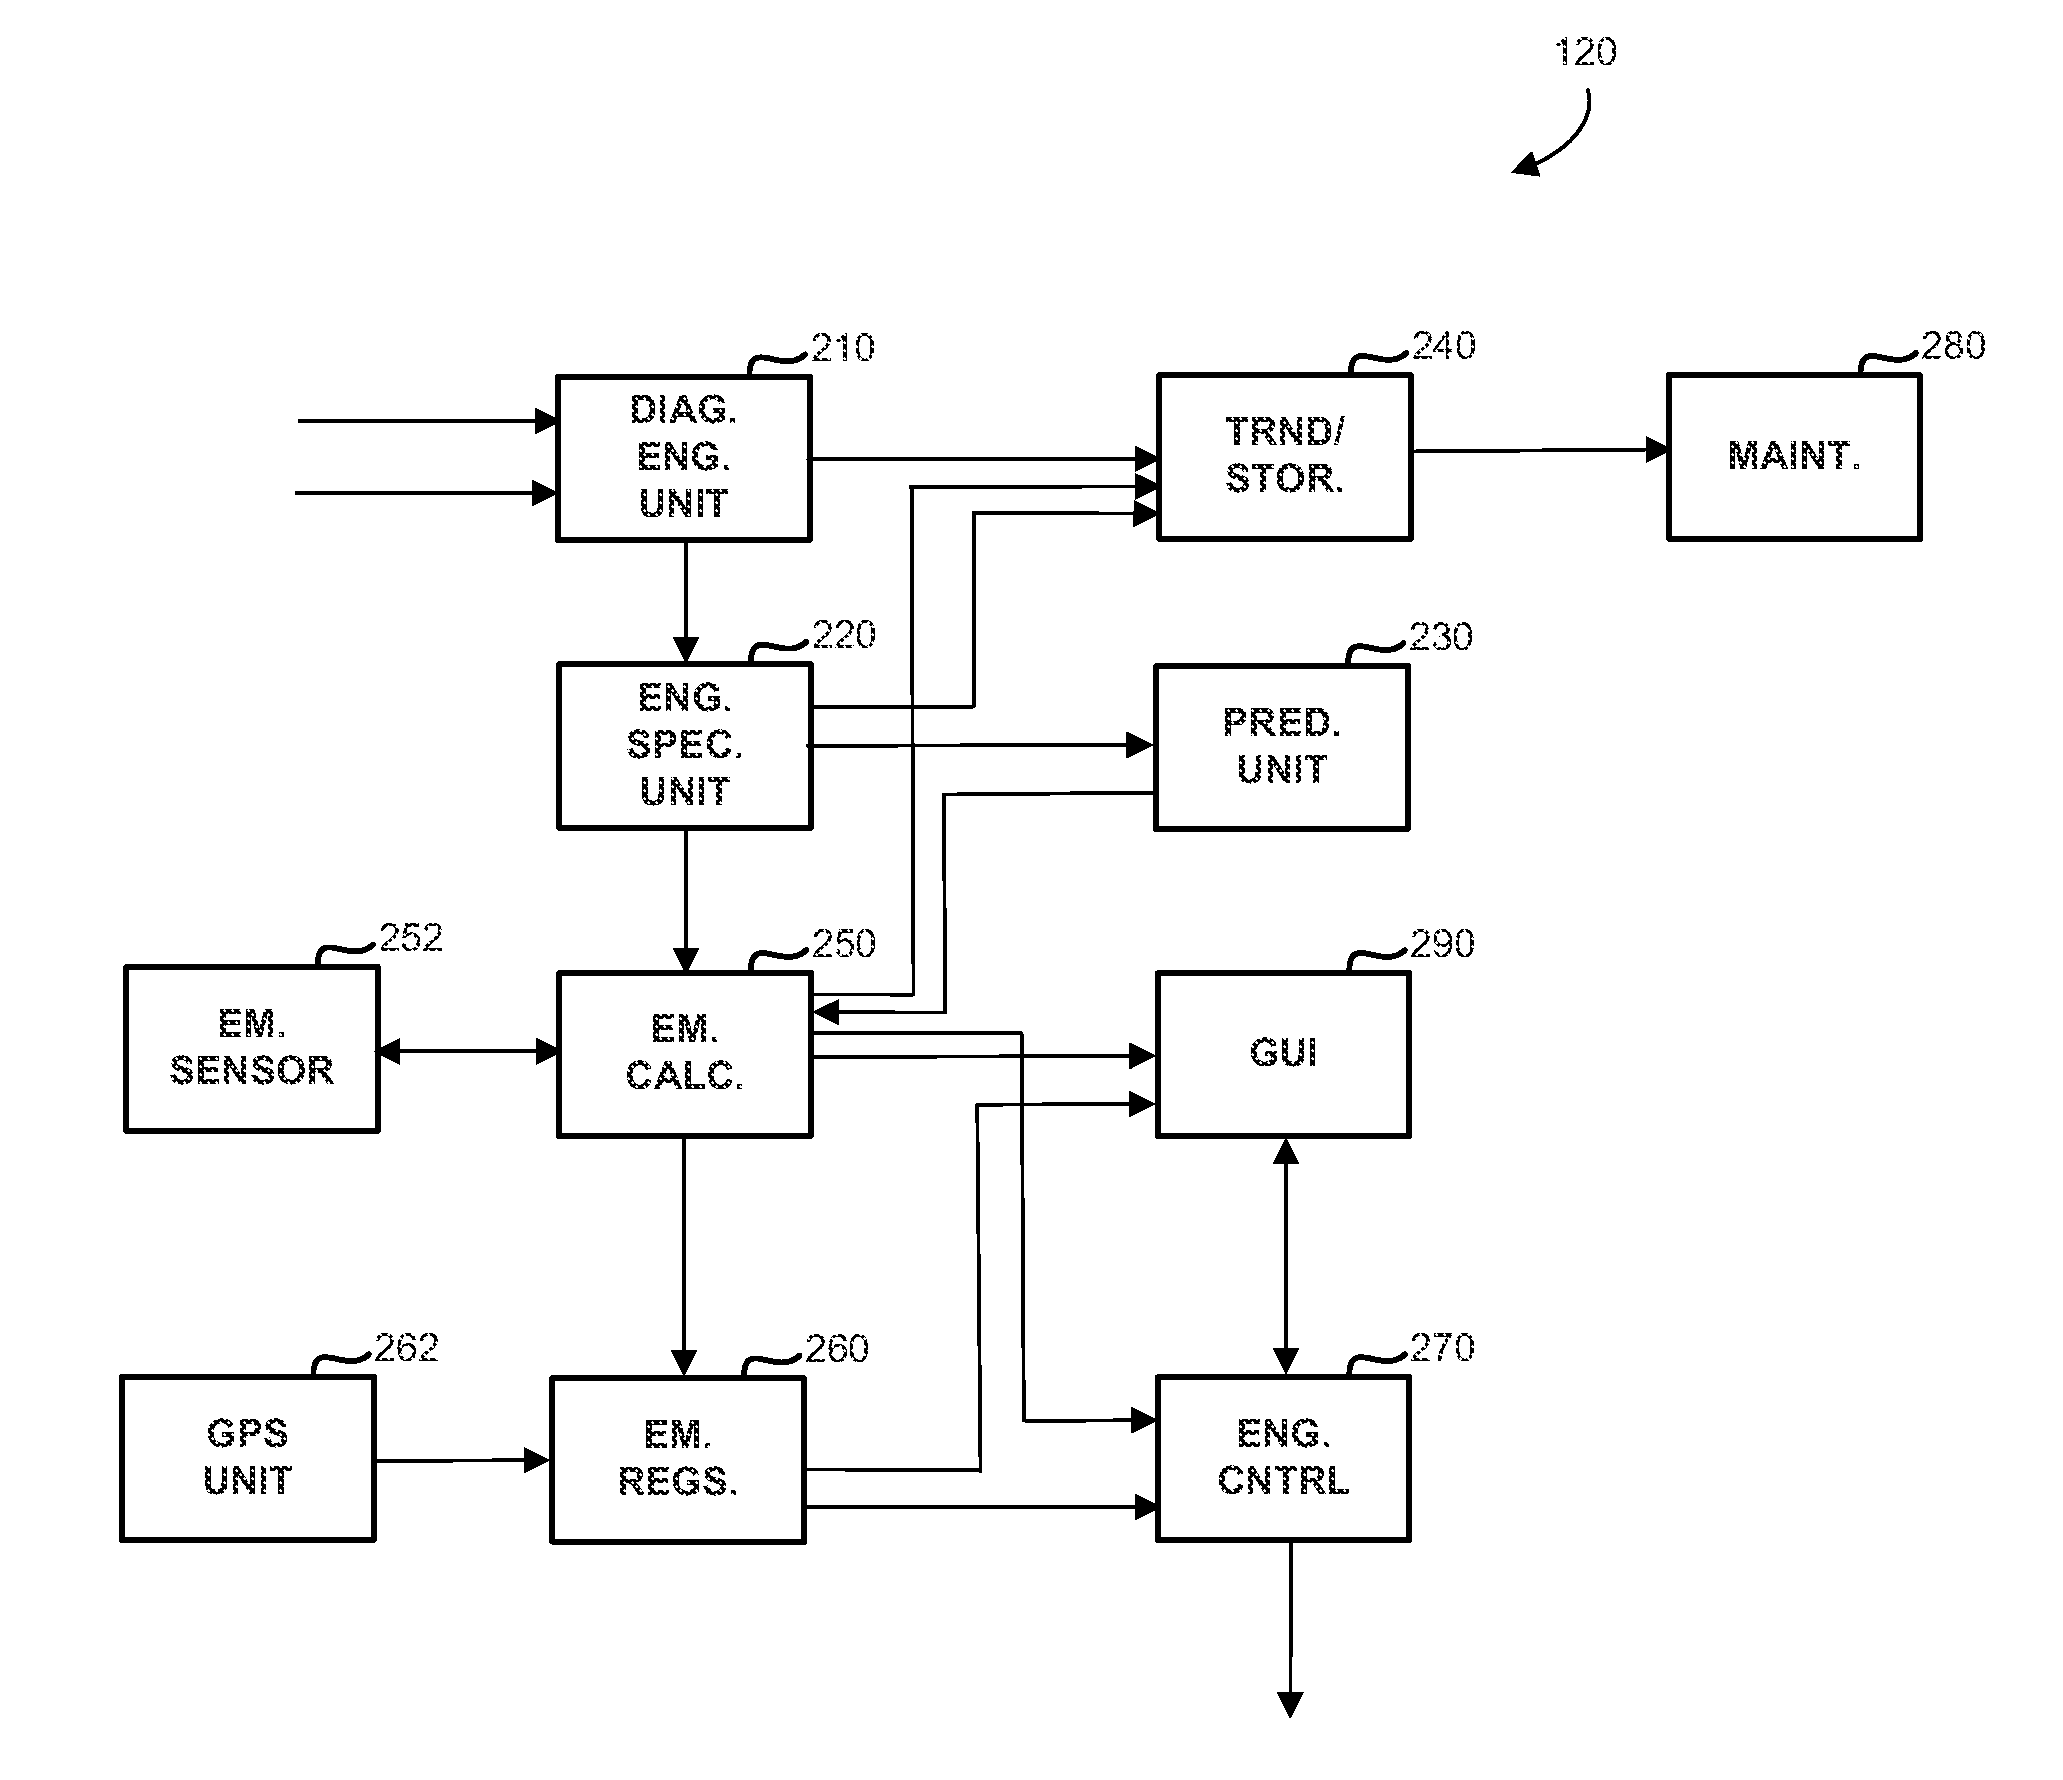 Operations support systems and methods for calculating and evaluating engine emissions